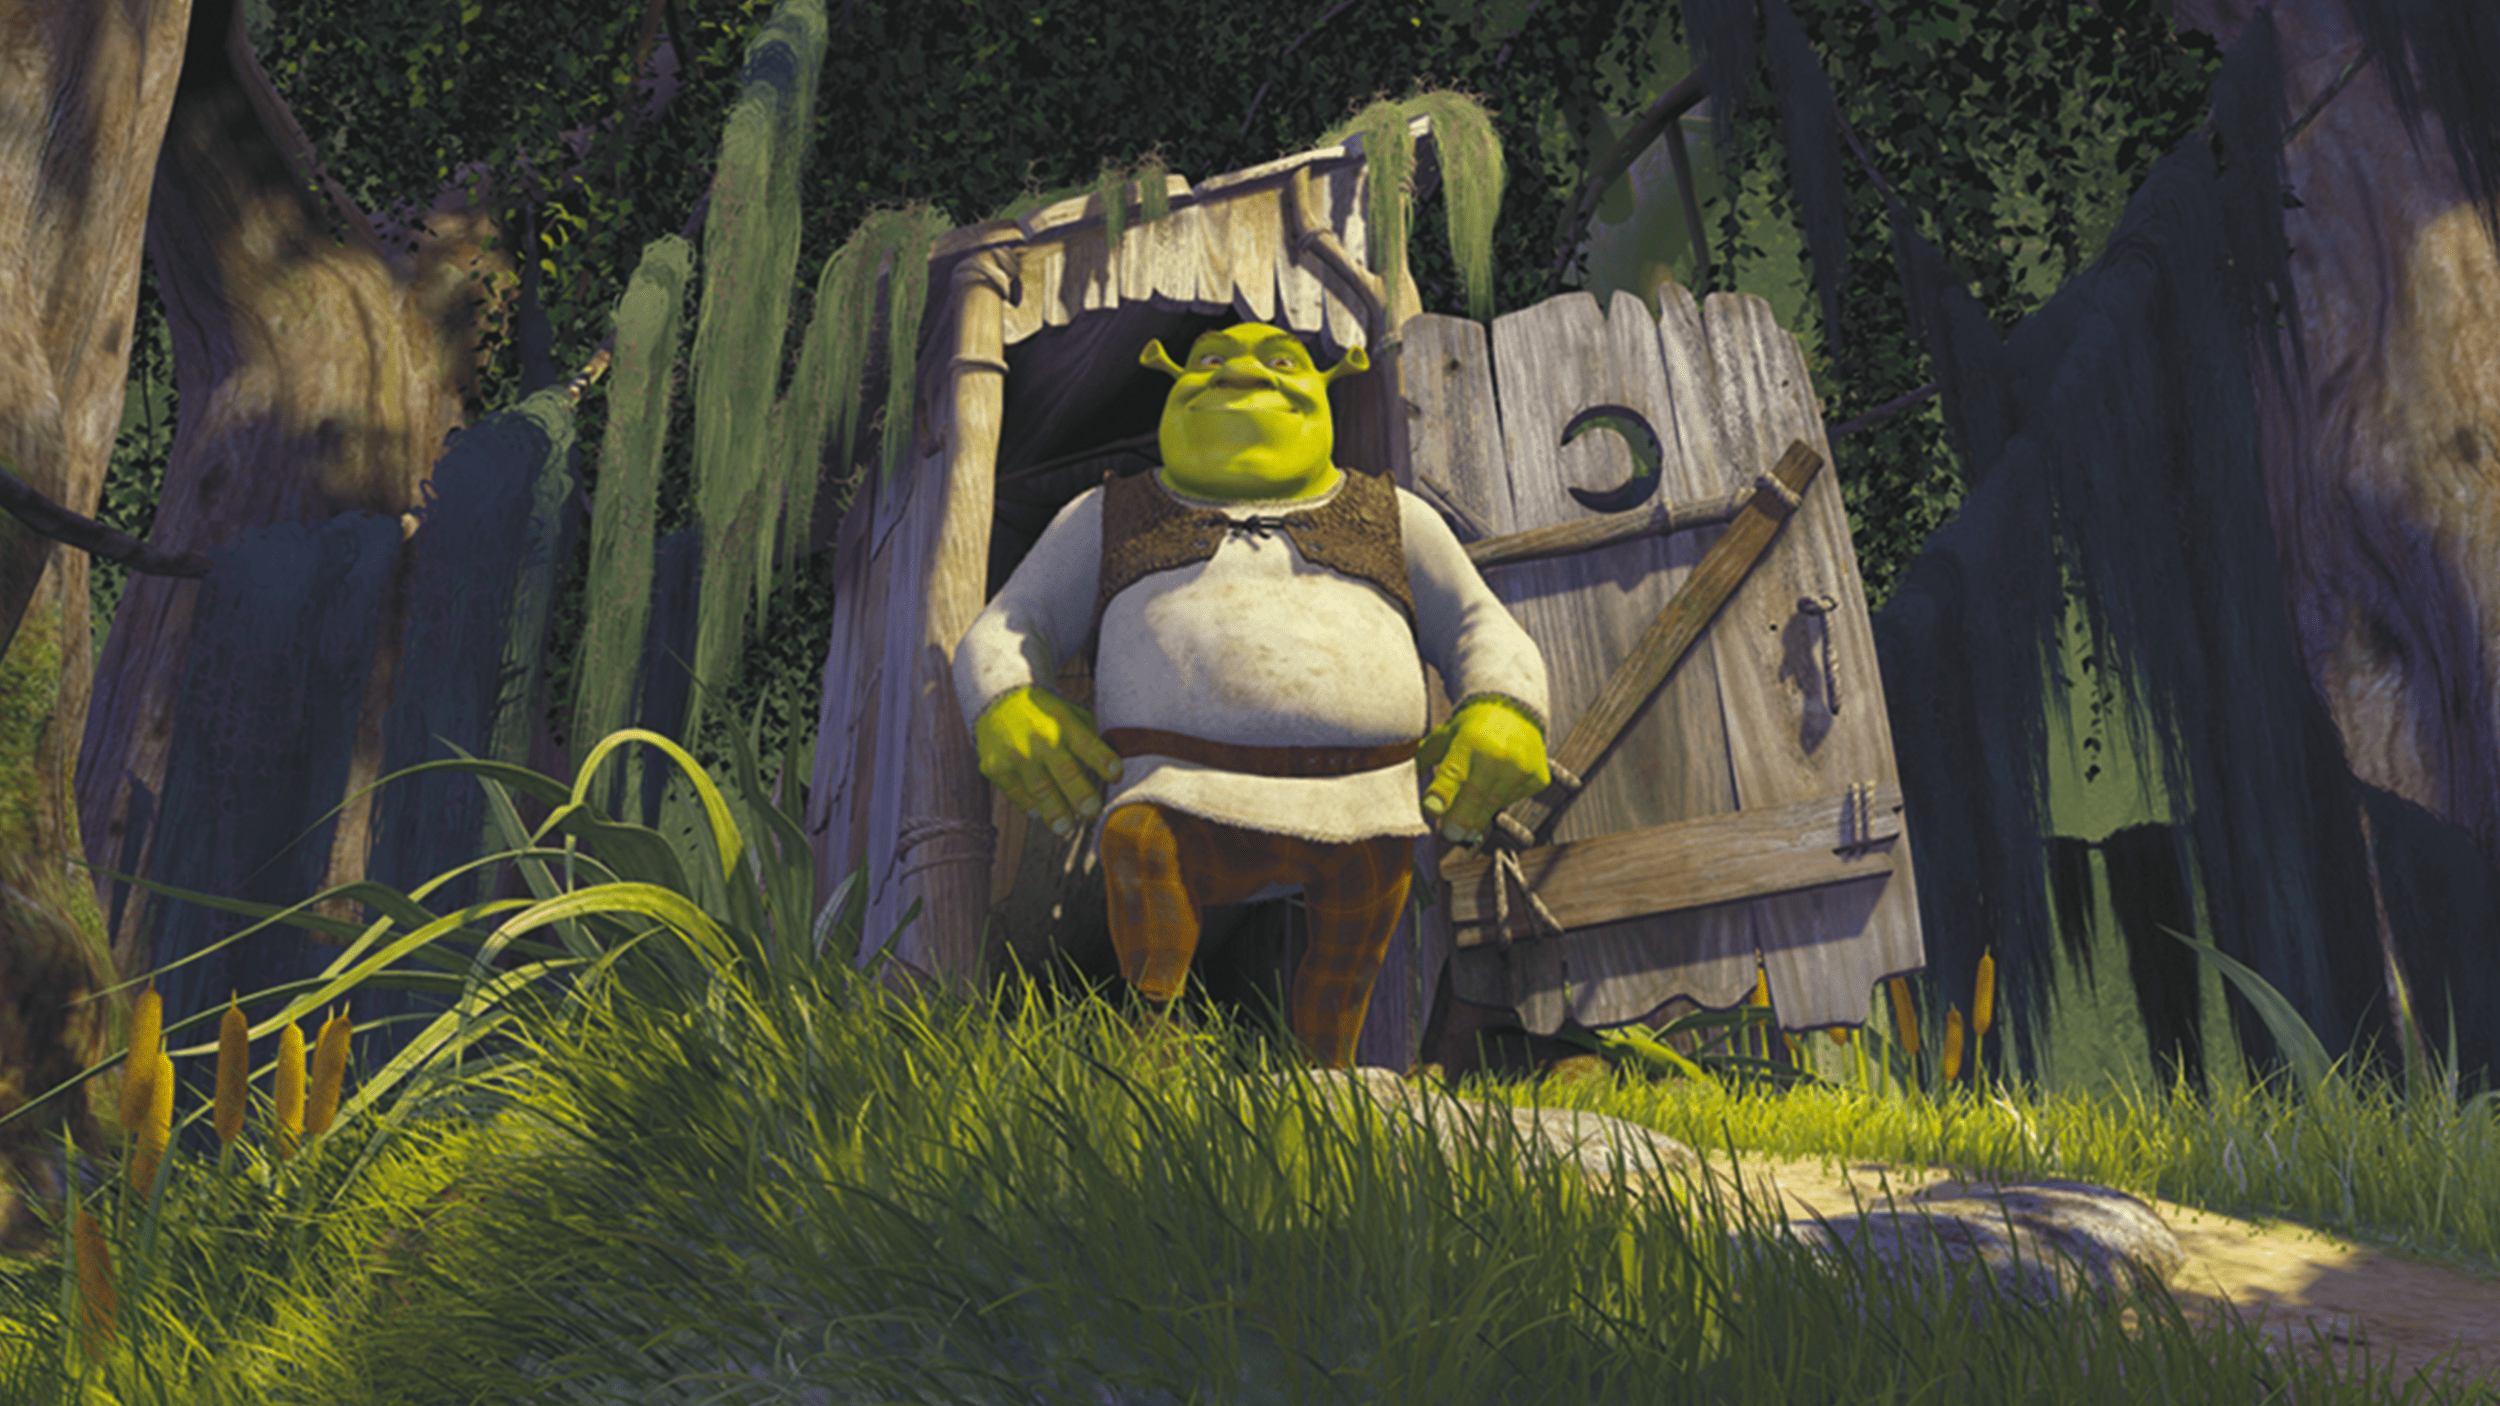 Drive-In Movie Night to feature Shrek